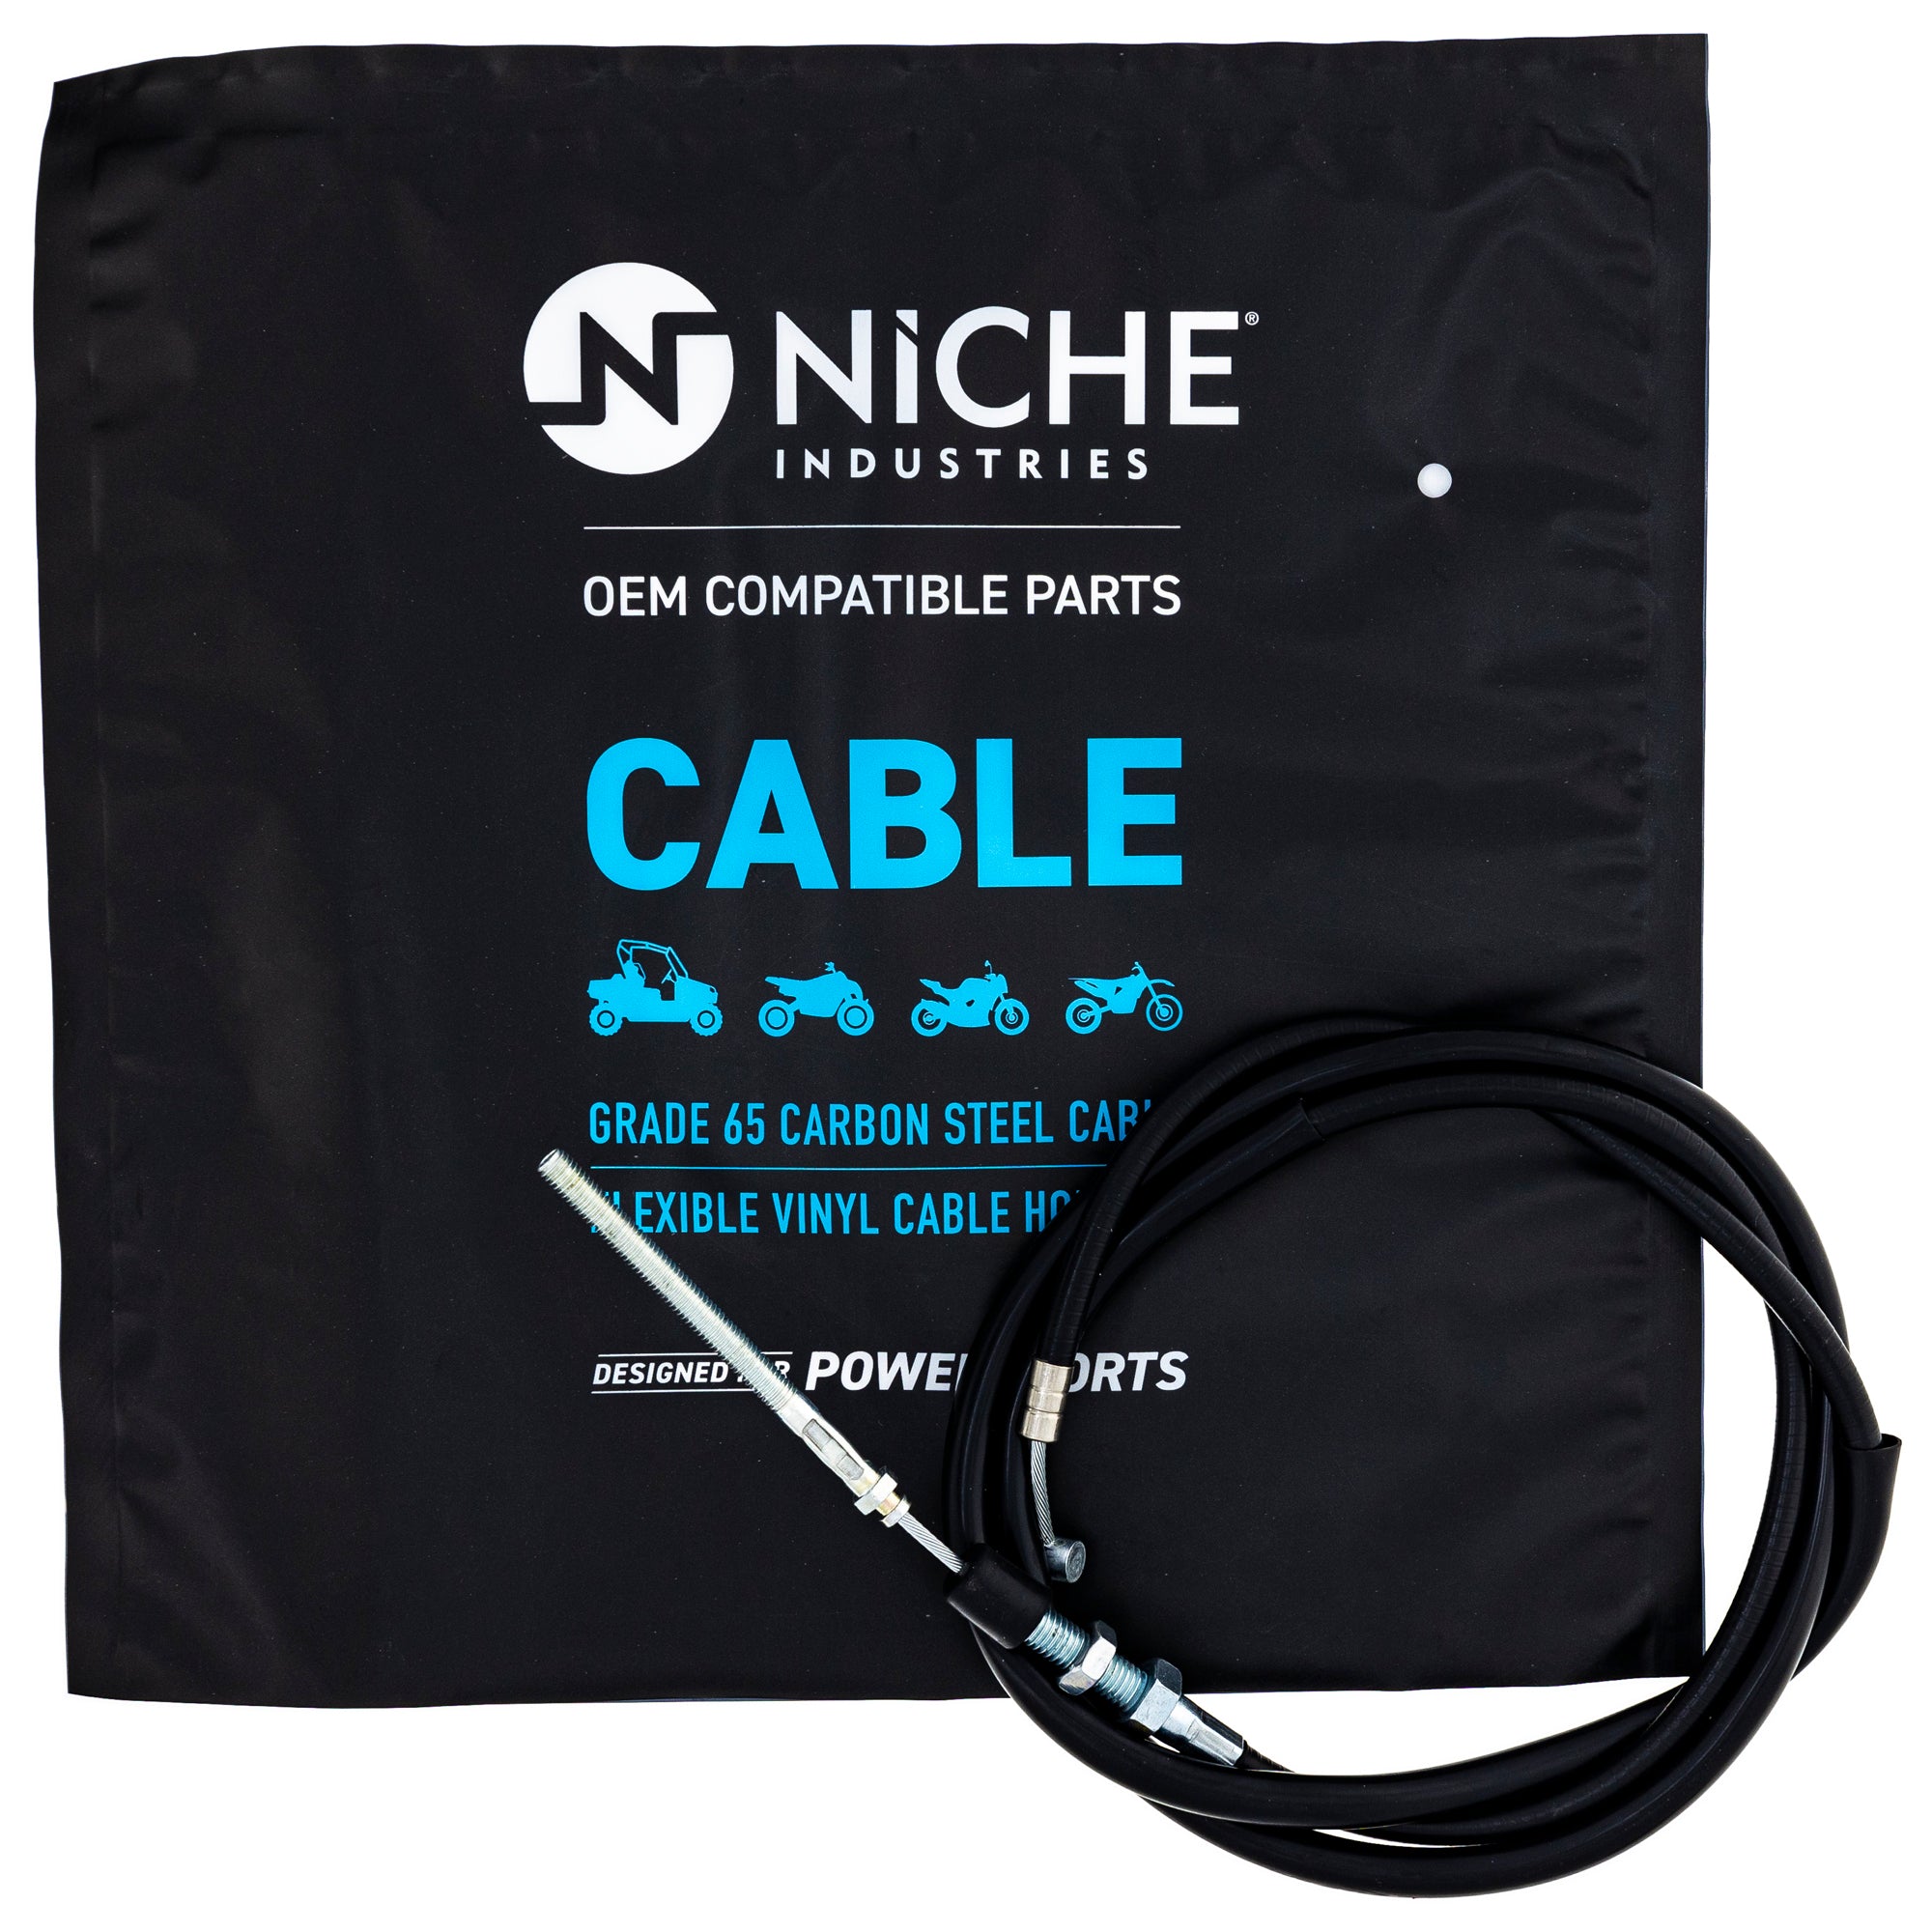 NICHE 519-CCB2705L Rear Brake Cable for zOTHER Quadrunner ALT125